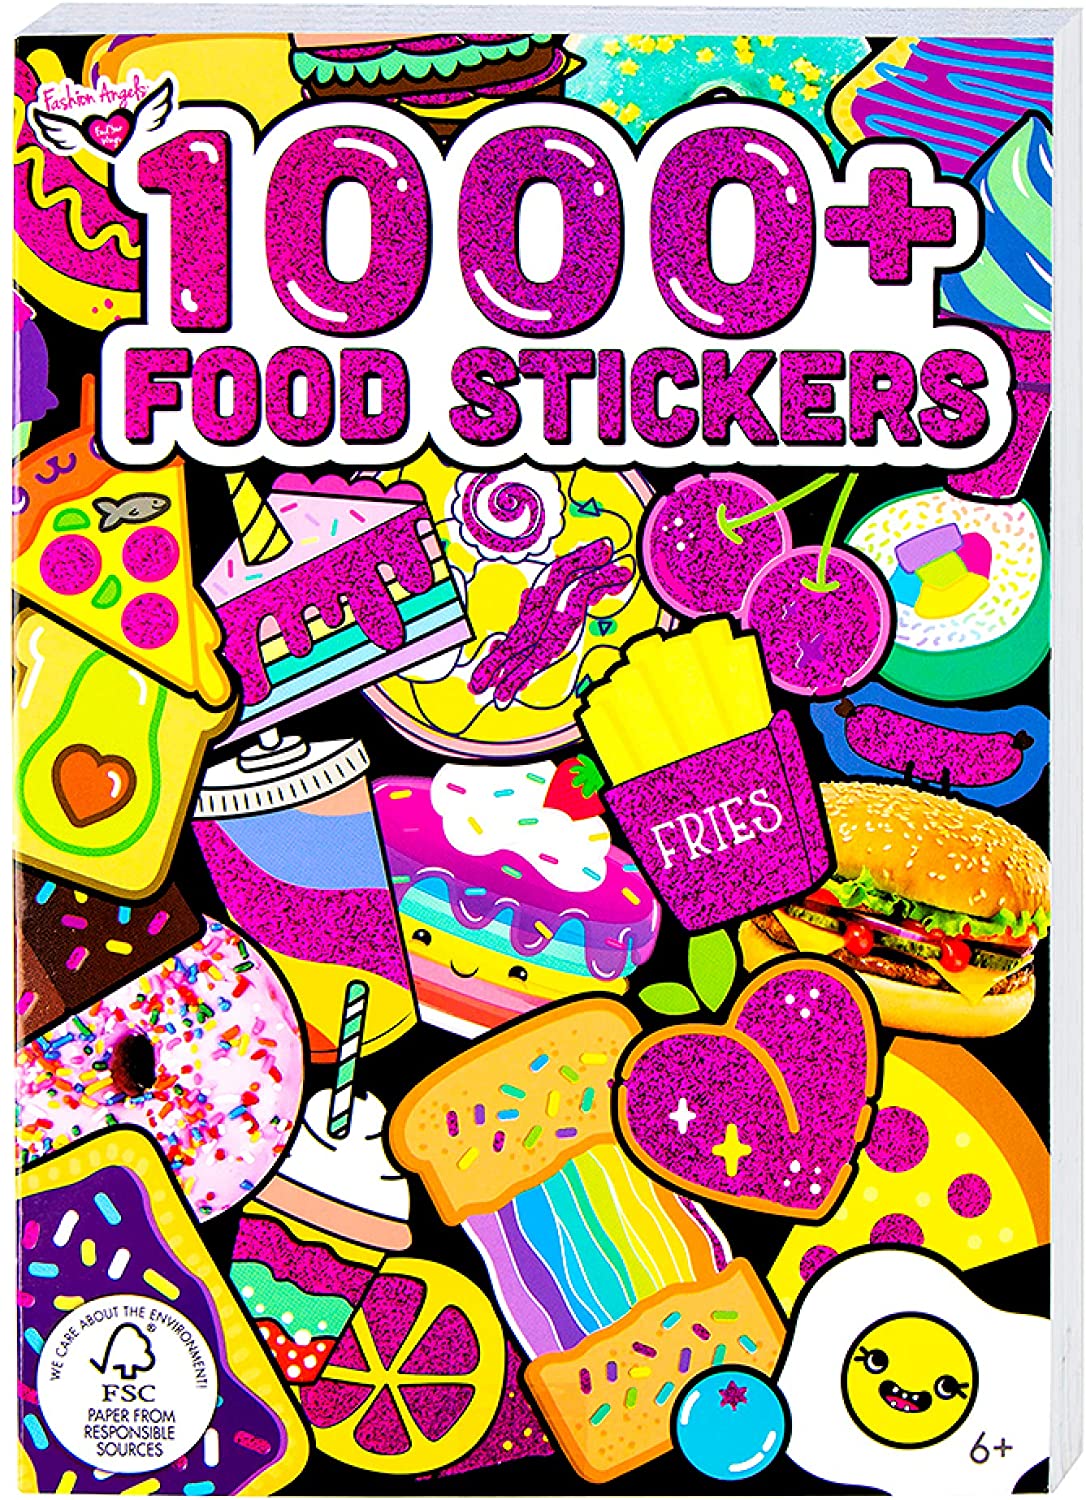 1000+ Food Stickers For Kids - Colorful & Cute Food Stickers Album For Laptops, Luggages, Journals, Notebooks & Greeting Cards, 40-Page Sticker Book For Kids Ages 6 And Up